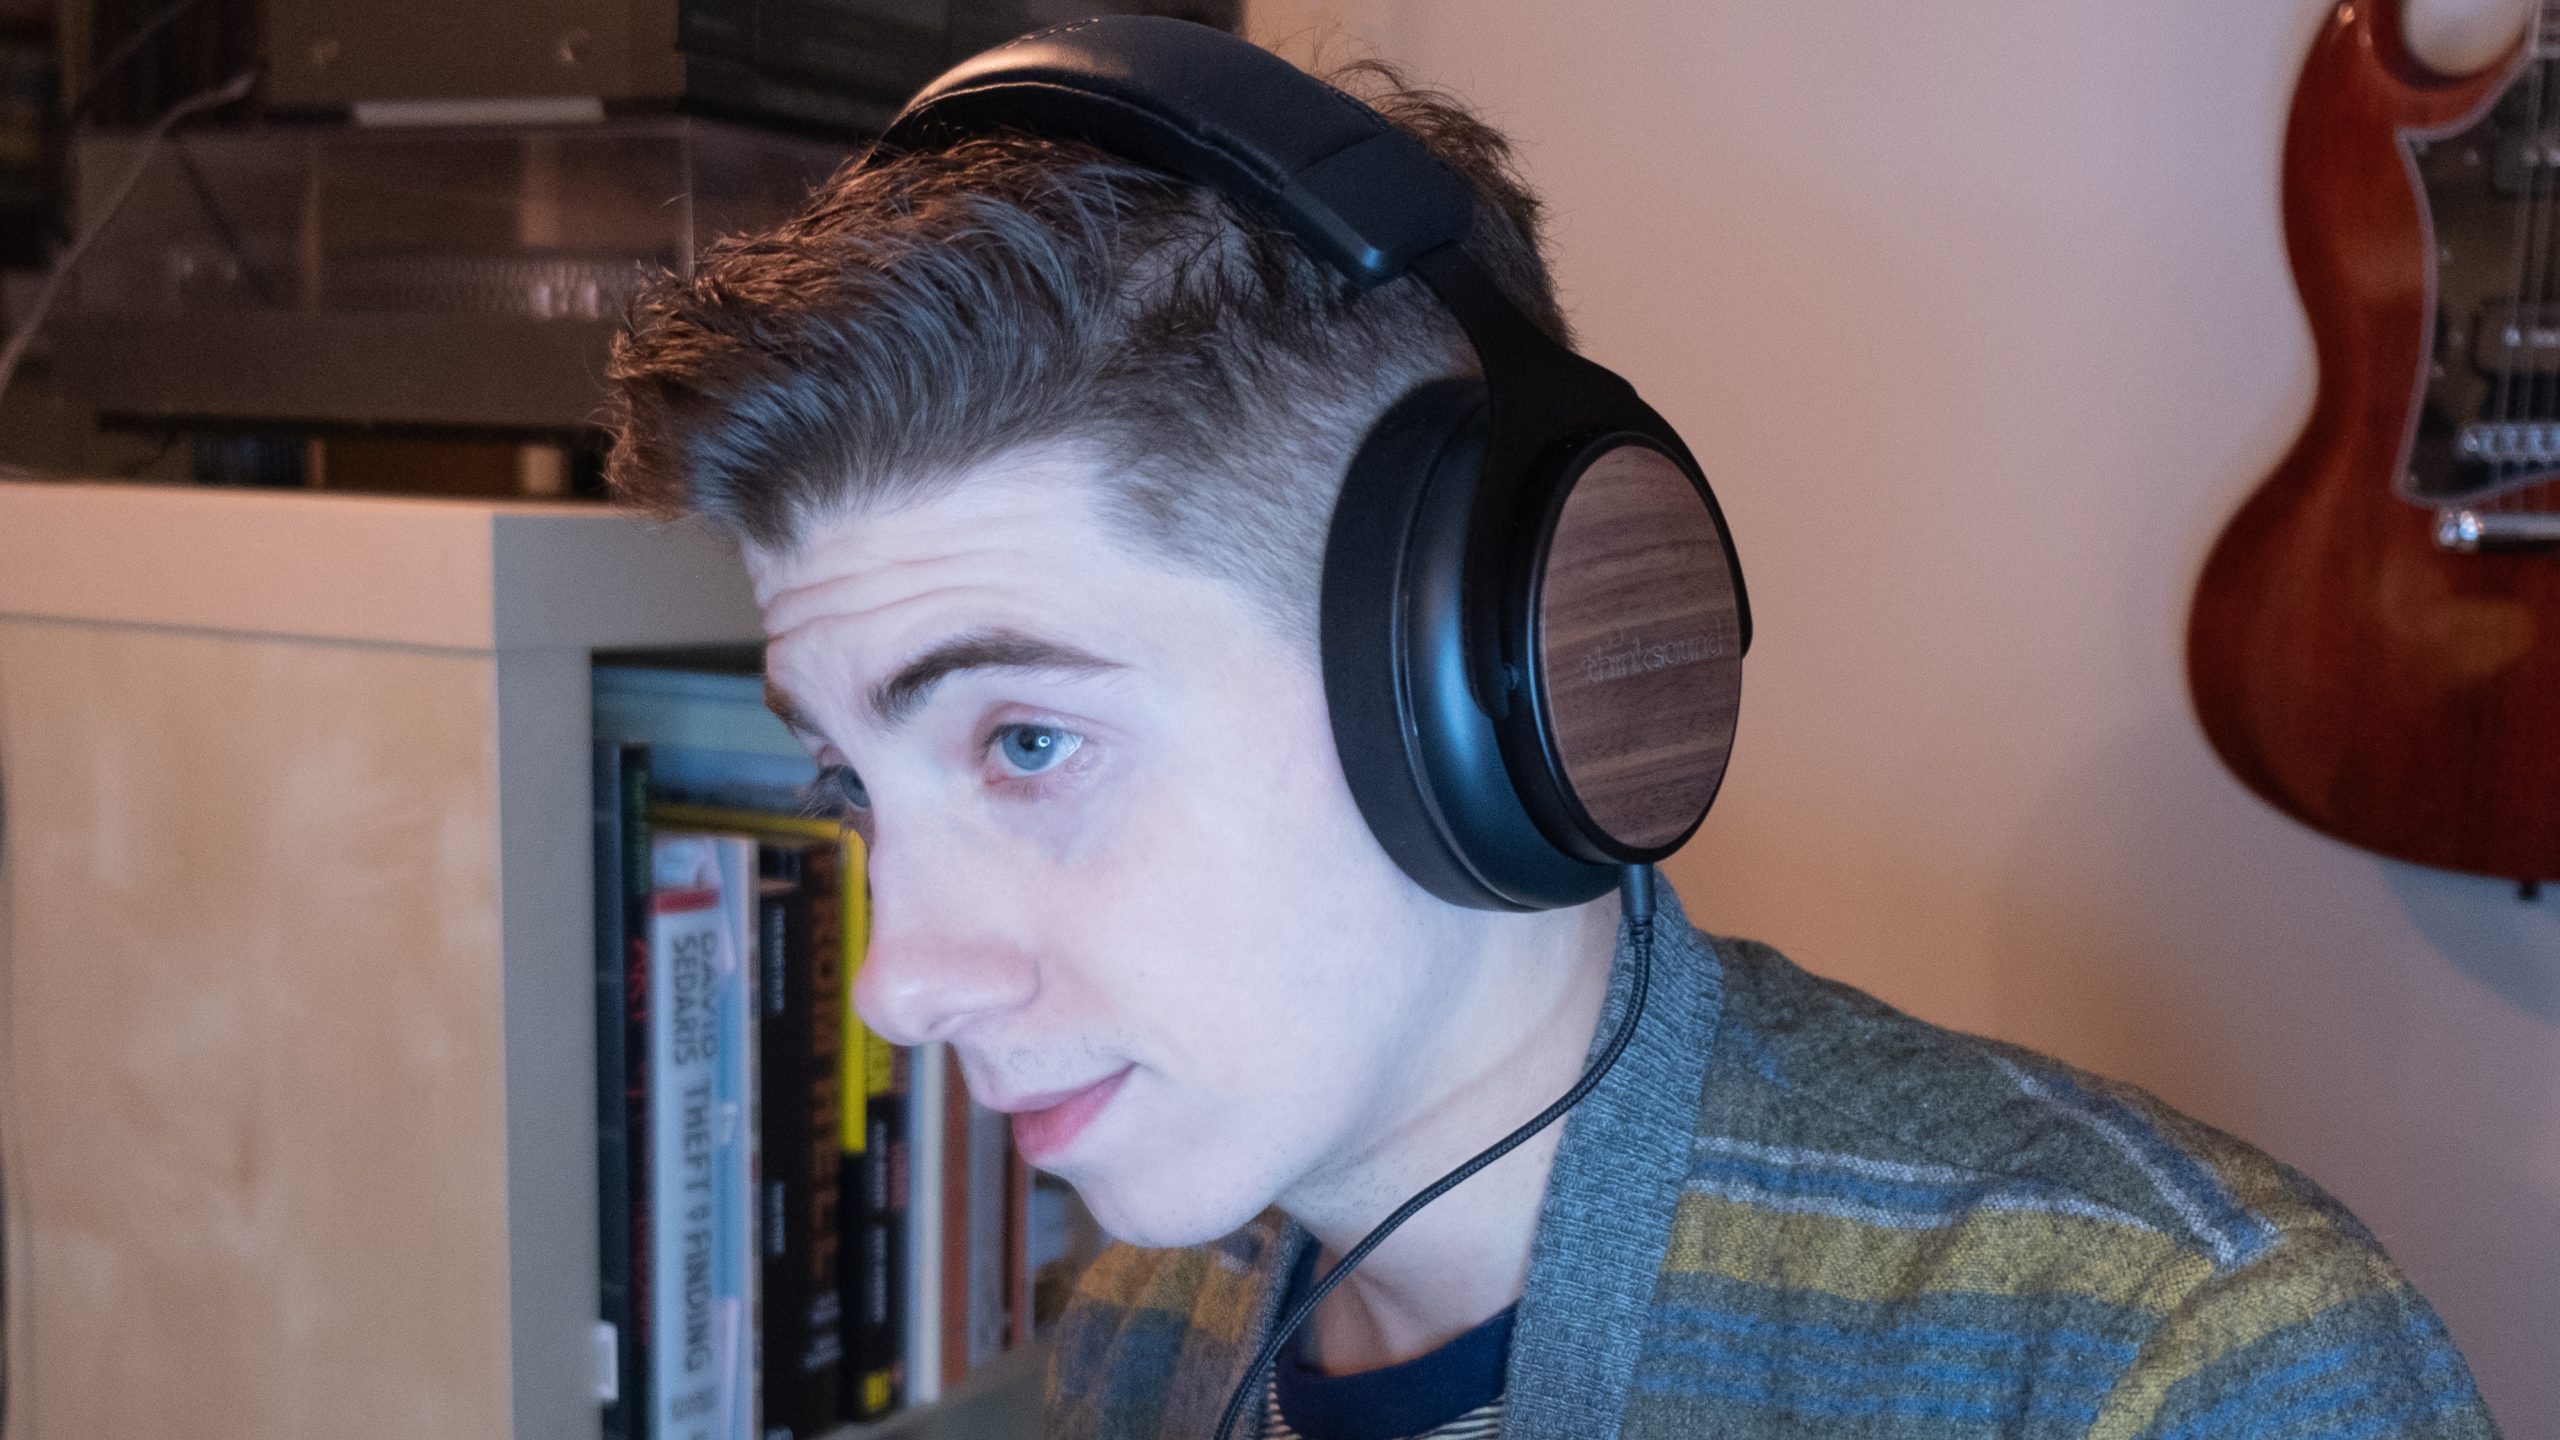 A man looks left while wearing the Thinksound ov21 headphones.